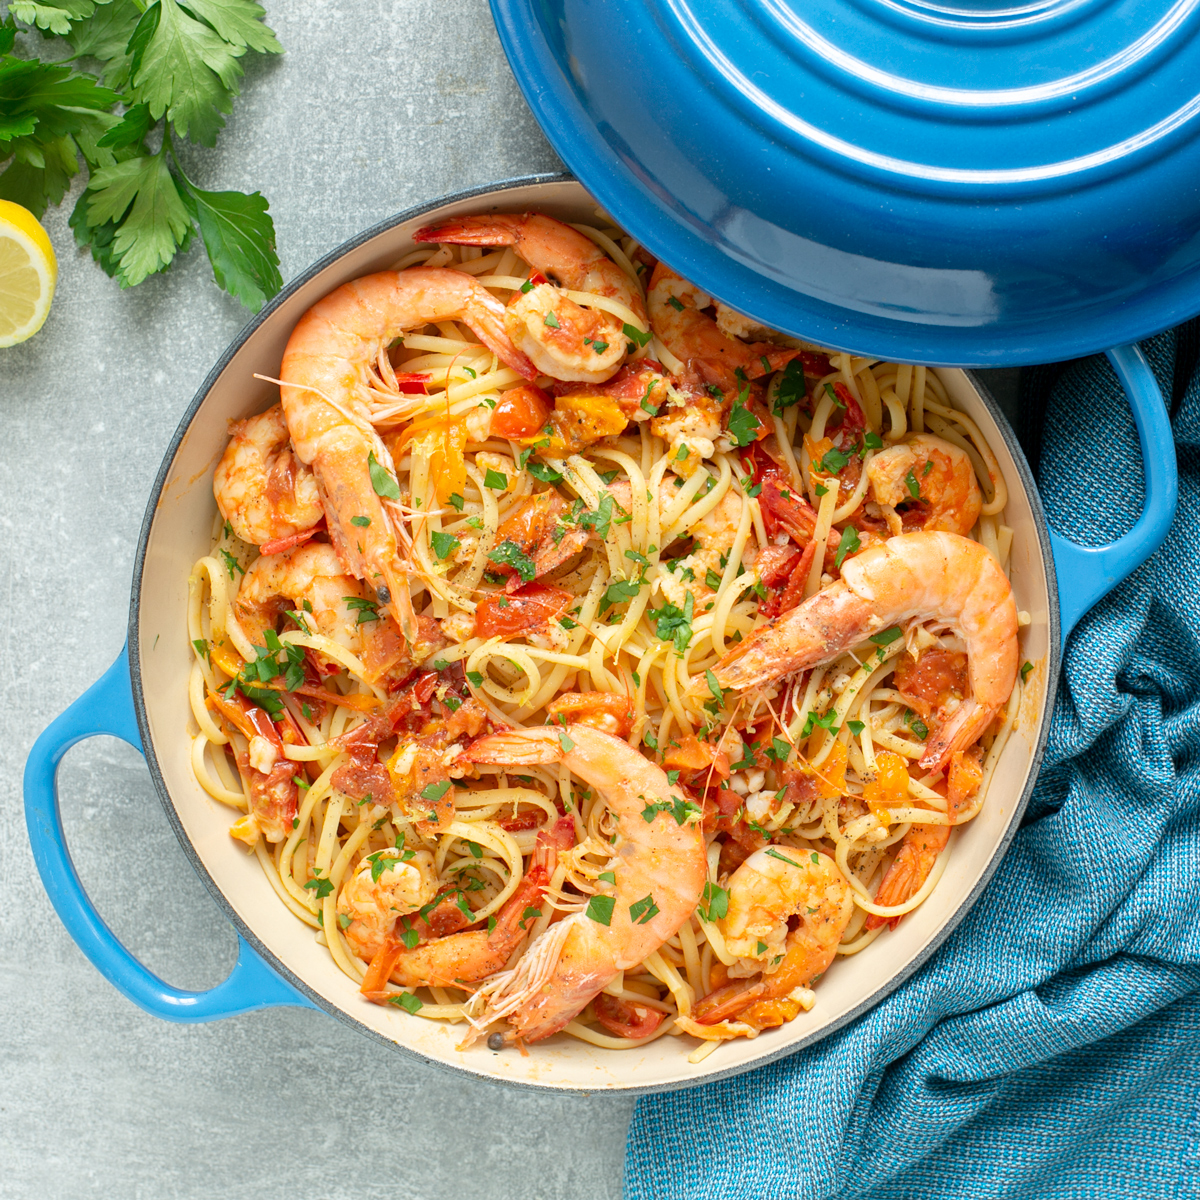 Shrimp linguine in a shallow casserole pot, topped with chopped parsley and whole king prawns.